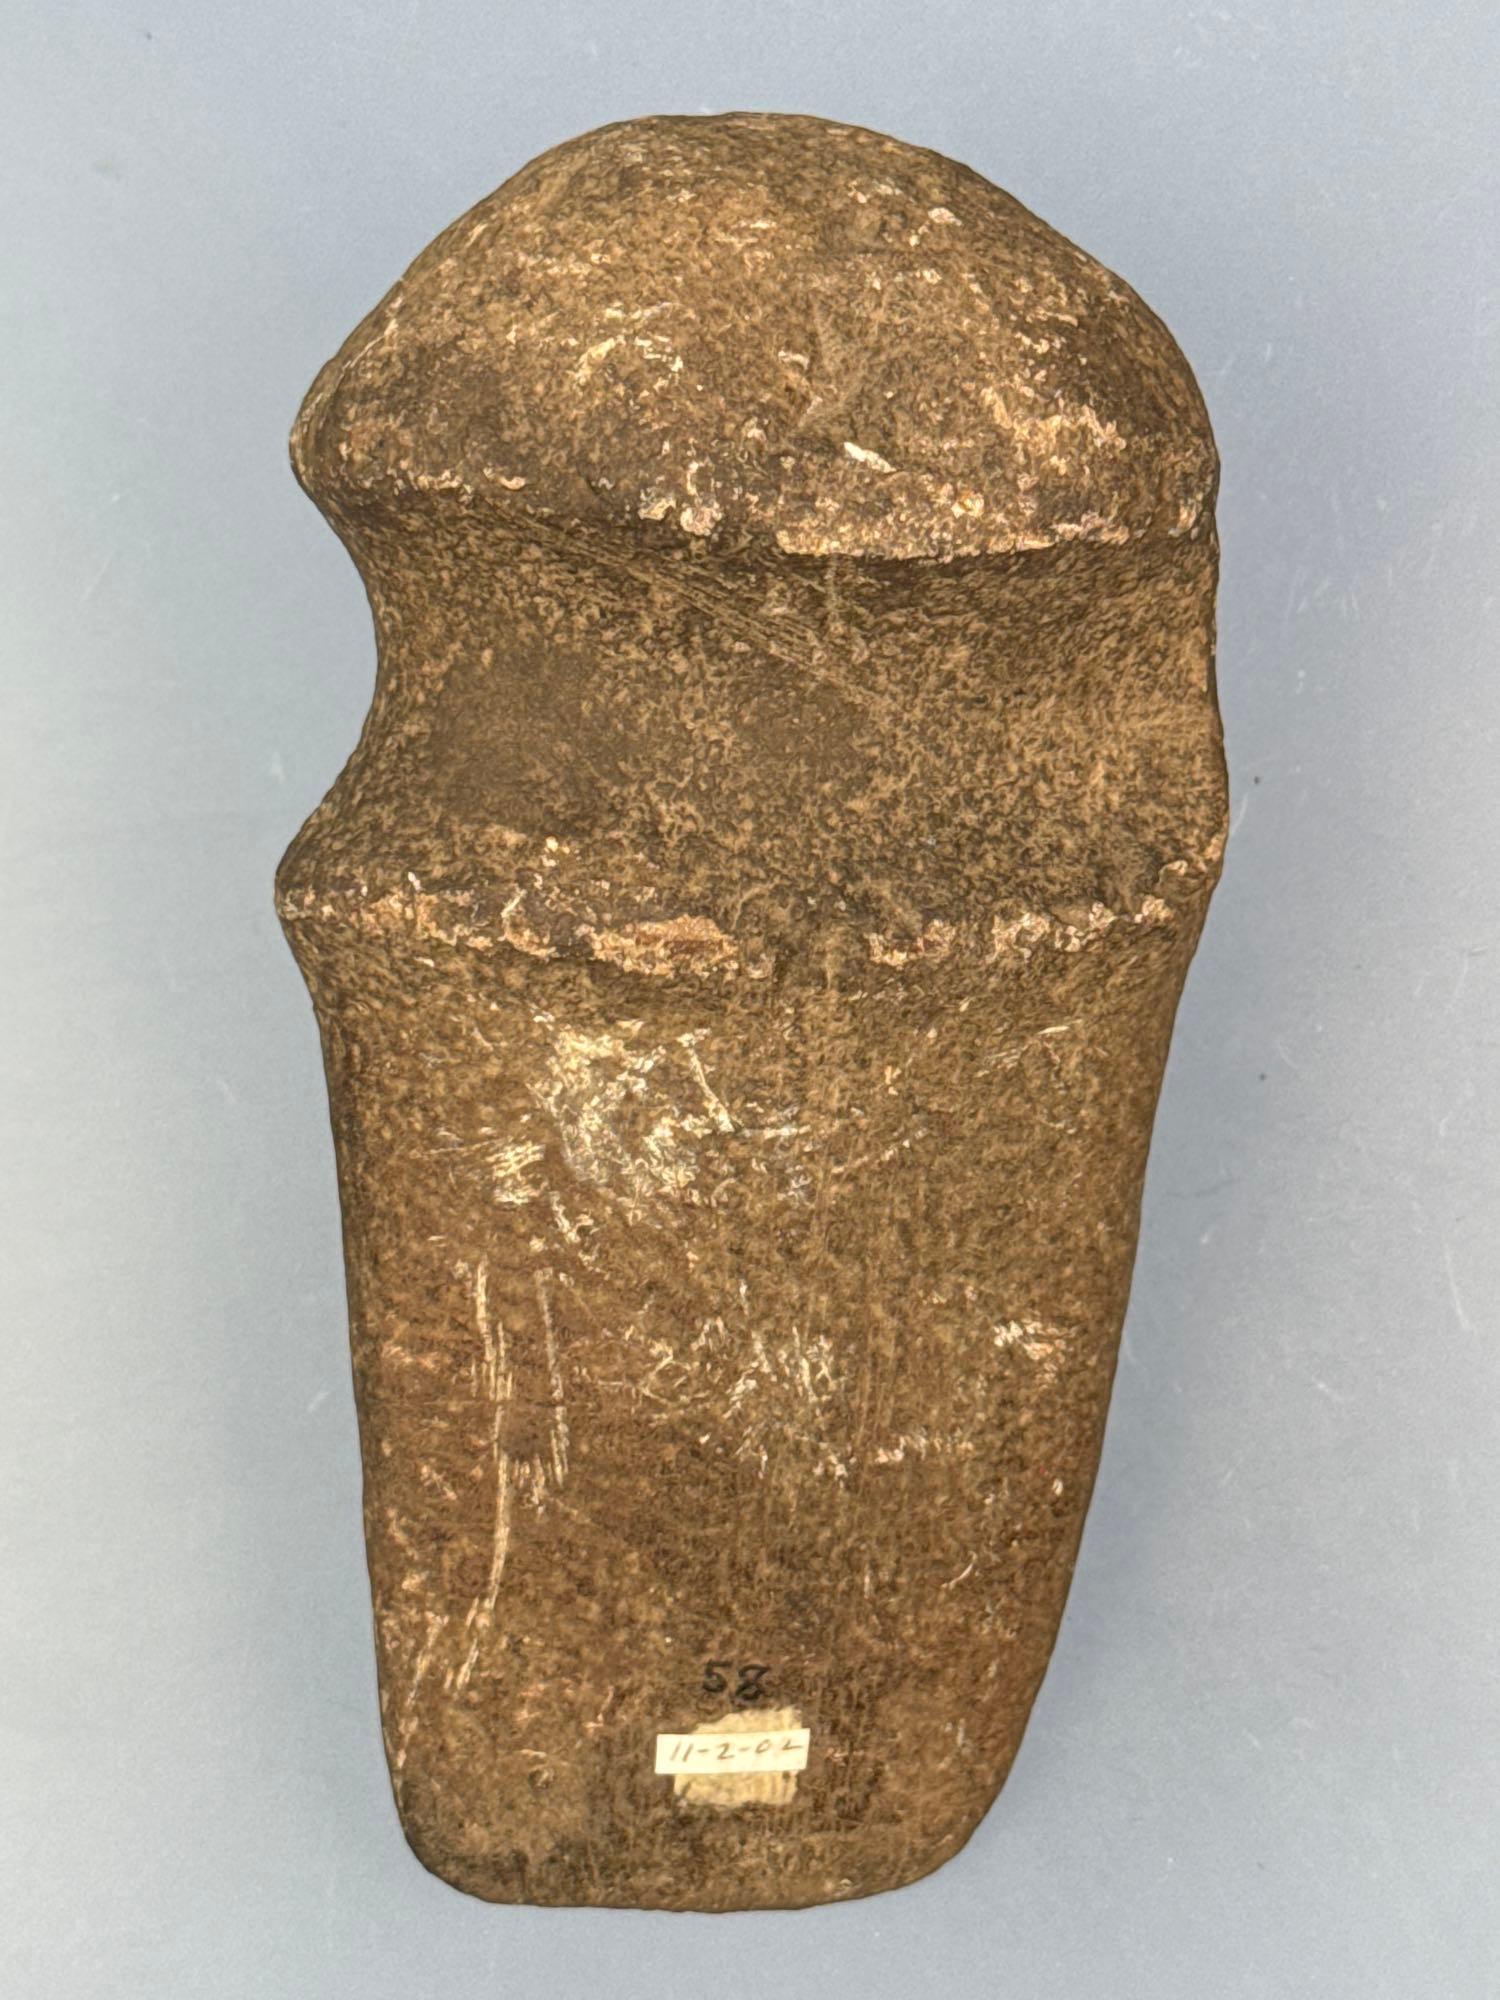 HIGHLY Stylized 6 3/4" Trophy Axe, Found in Ohio, Ex: Bob Sharp Collection, Walt completed a siding